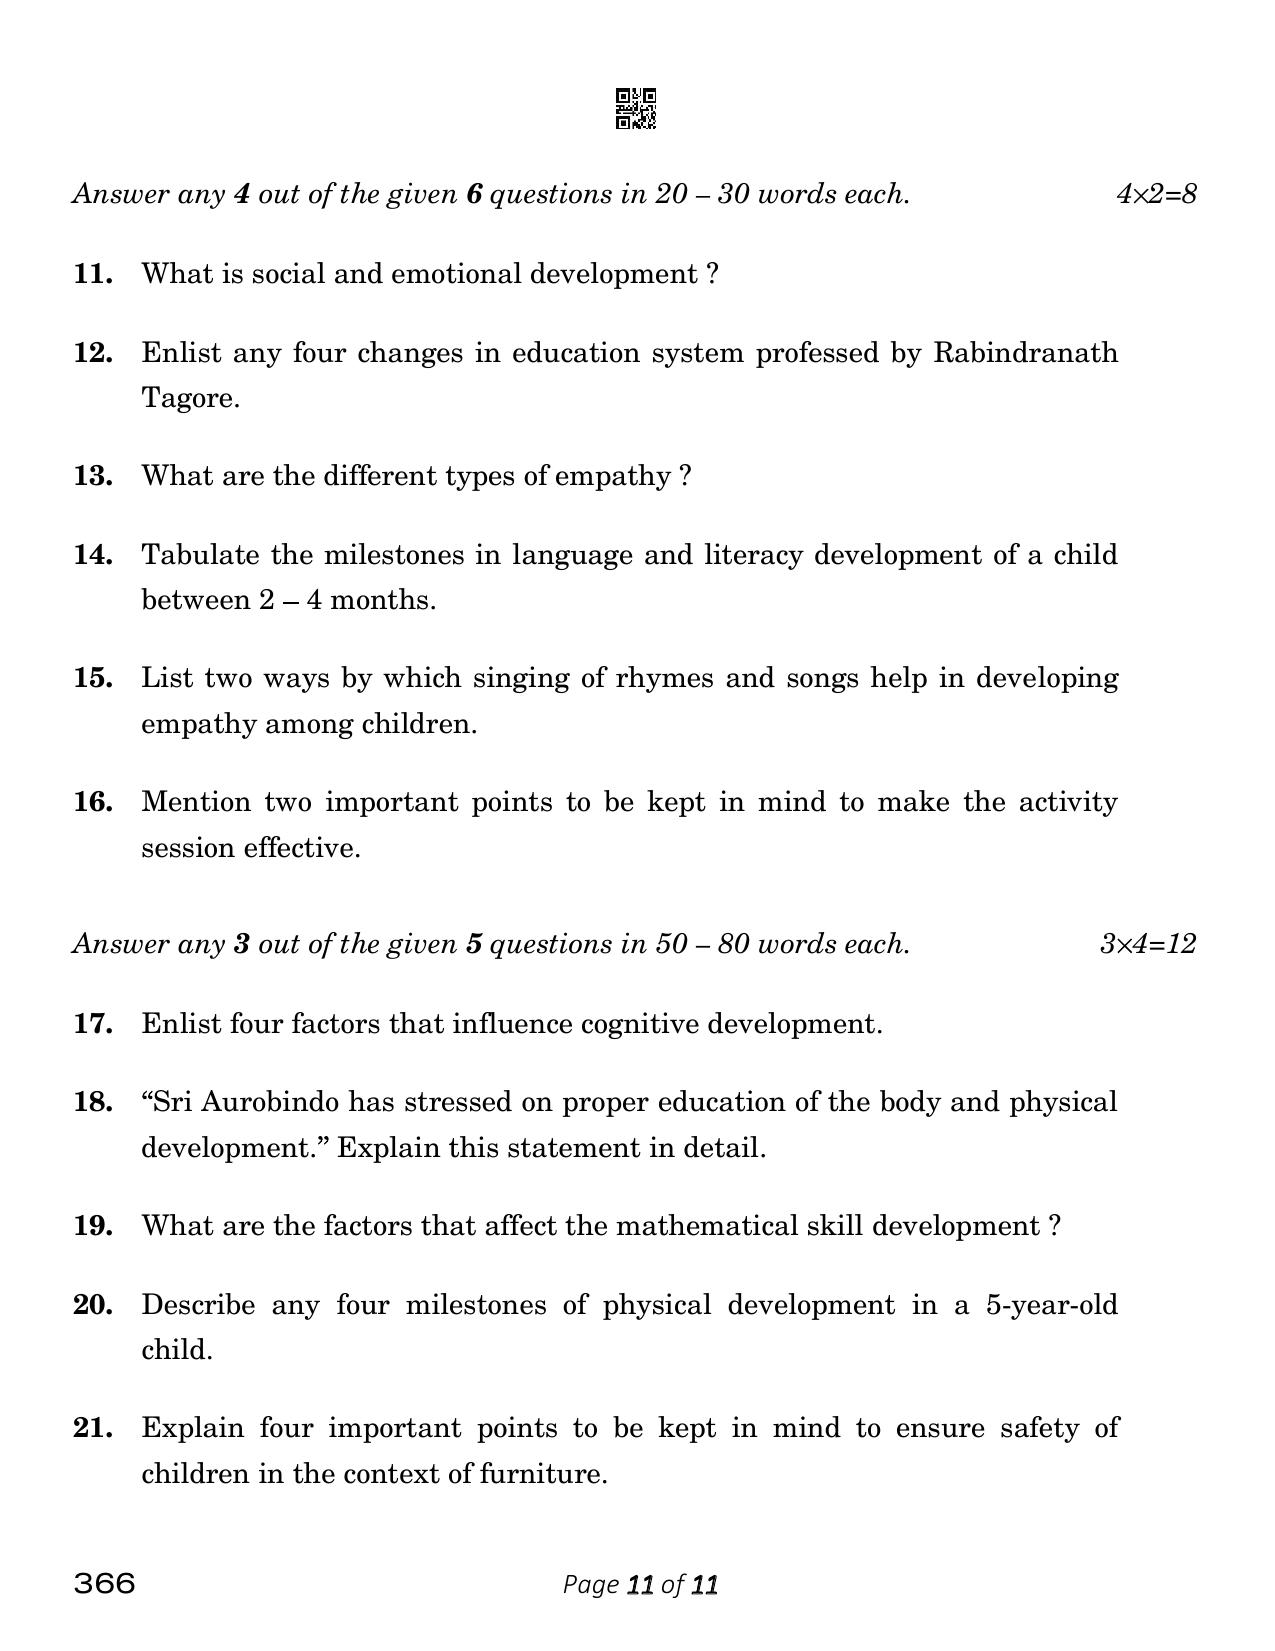 CBSE Class 12 Early Childhood Care & Education (Compartment) 2023 Question Paper - Page 11